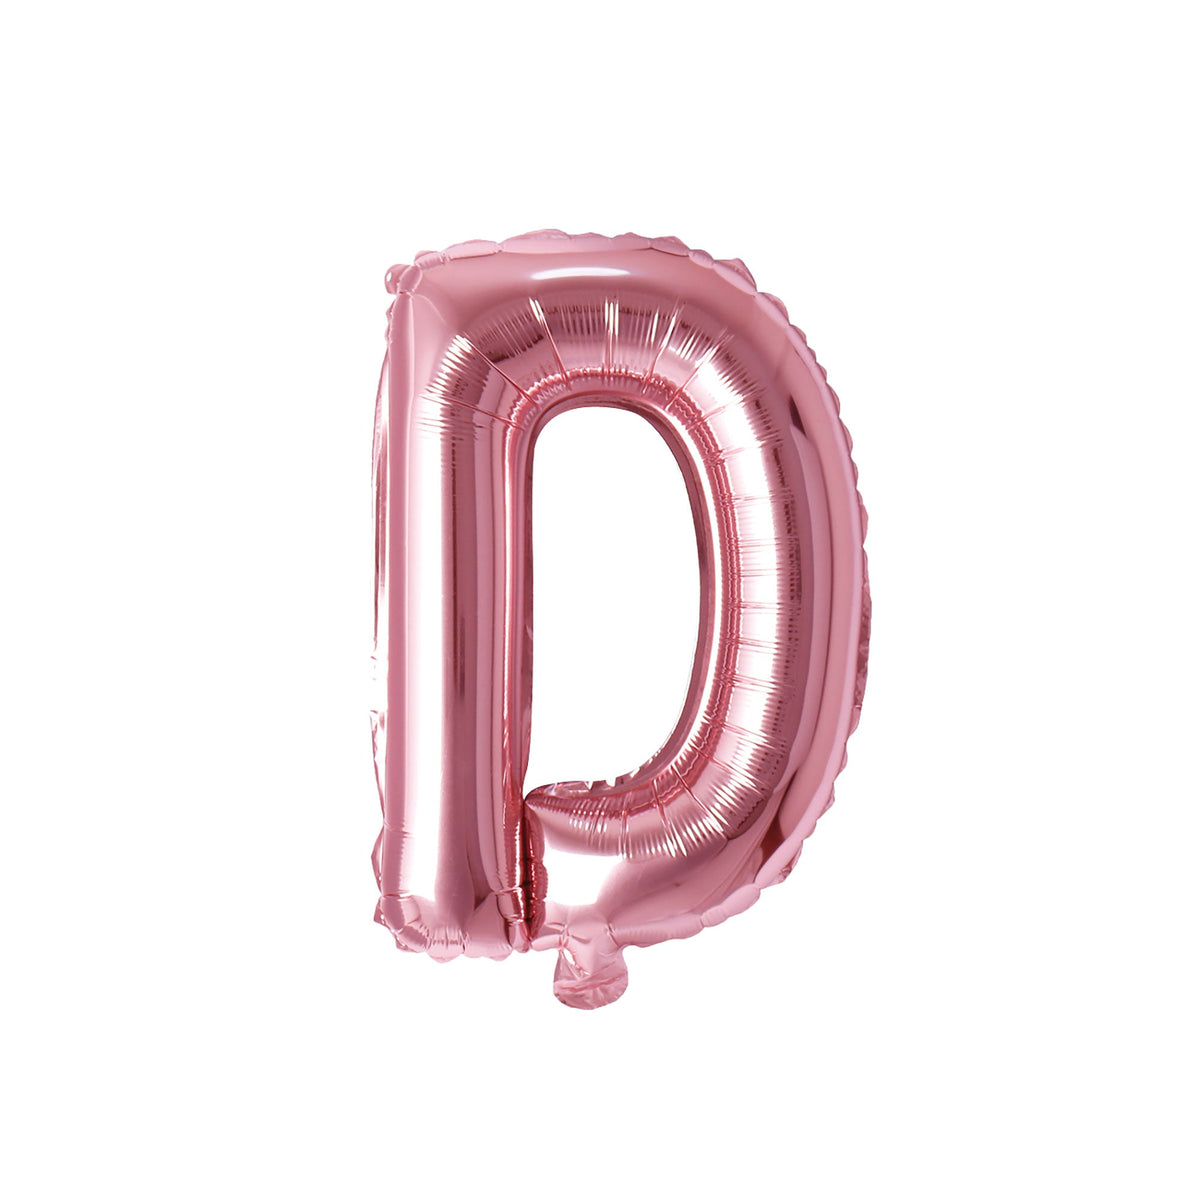 PARTY EXPERT Balloons Rose Gold Letter D Foil Balloon, 16 Inches, 1 Count 810064194221